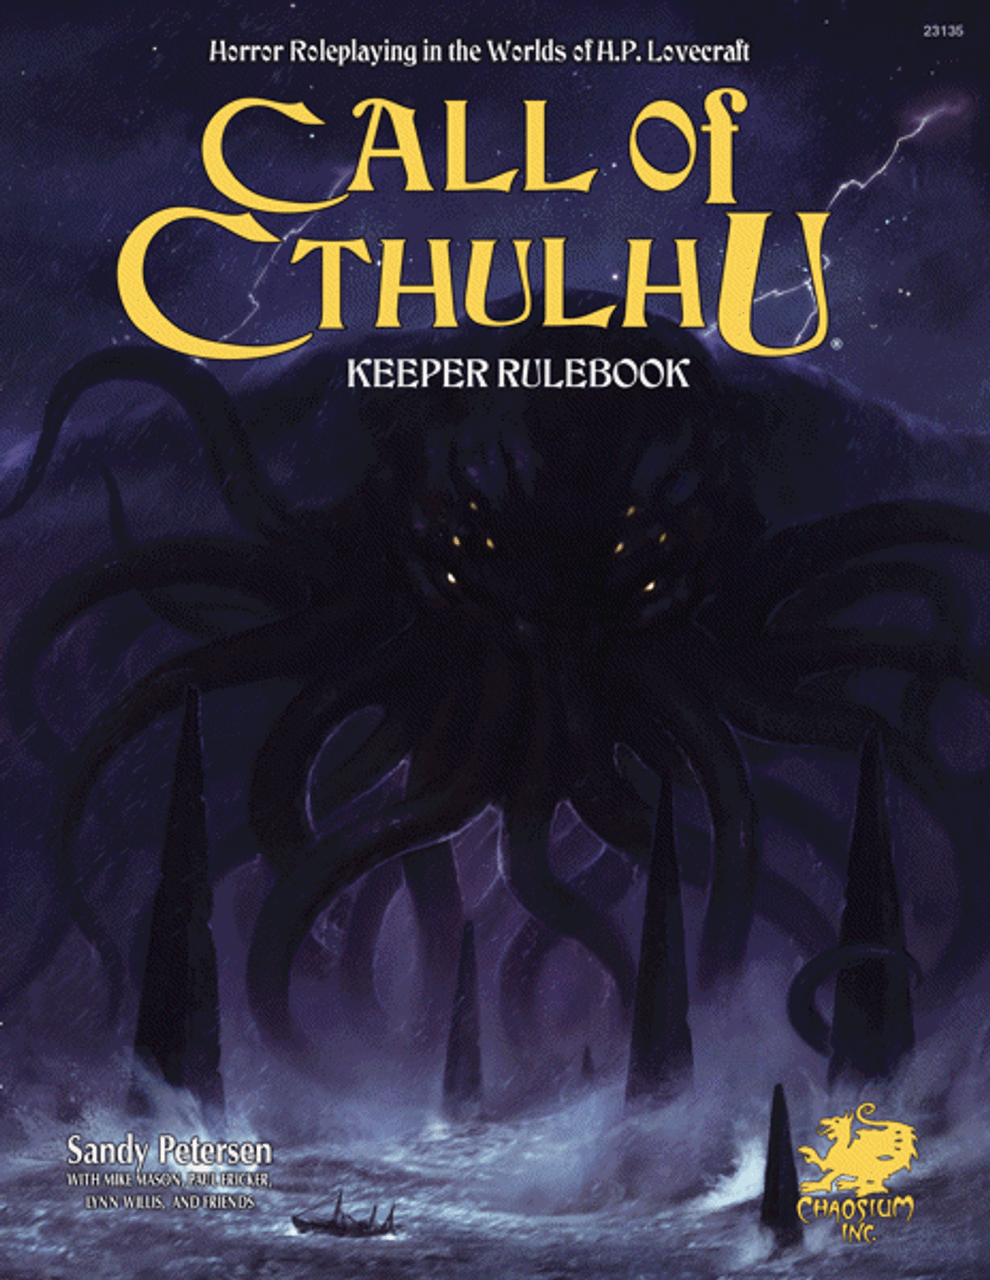 Several hours in, Call of Cthulhu doesn't seem that scary